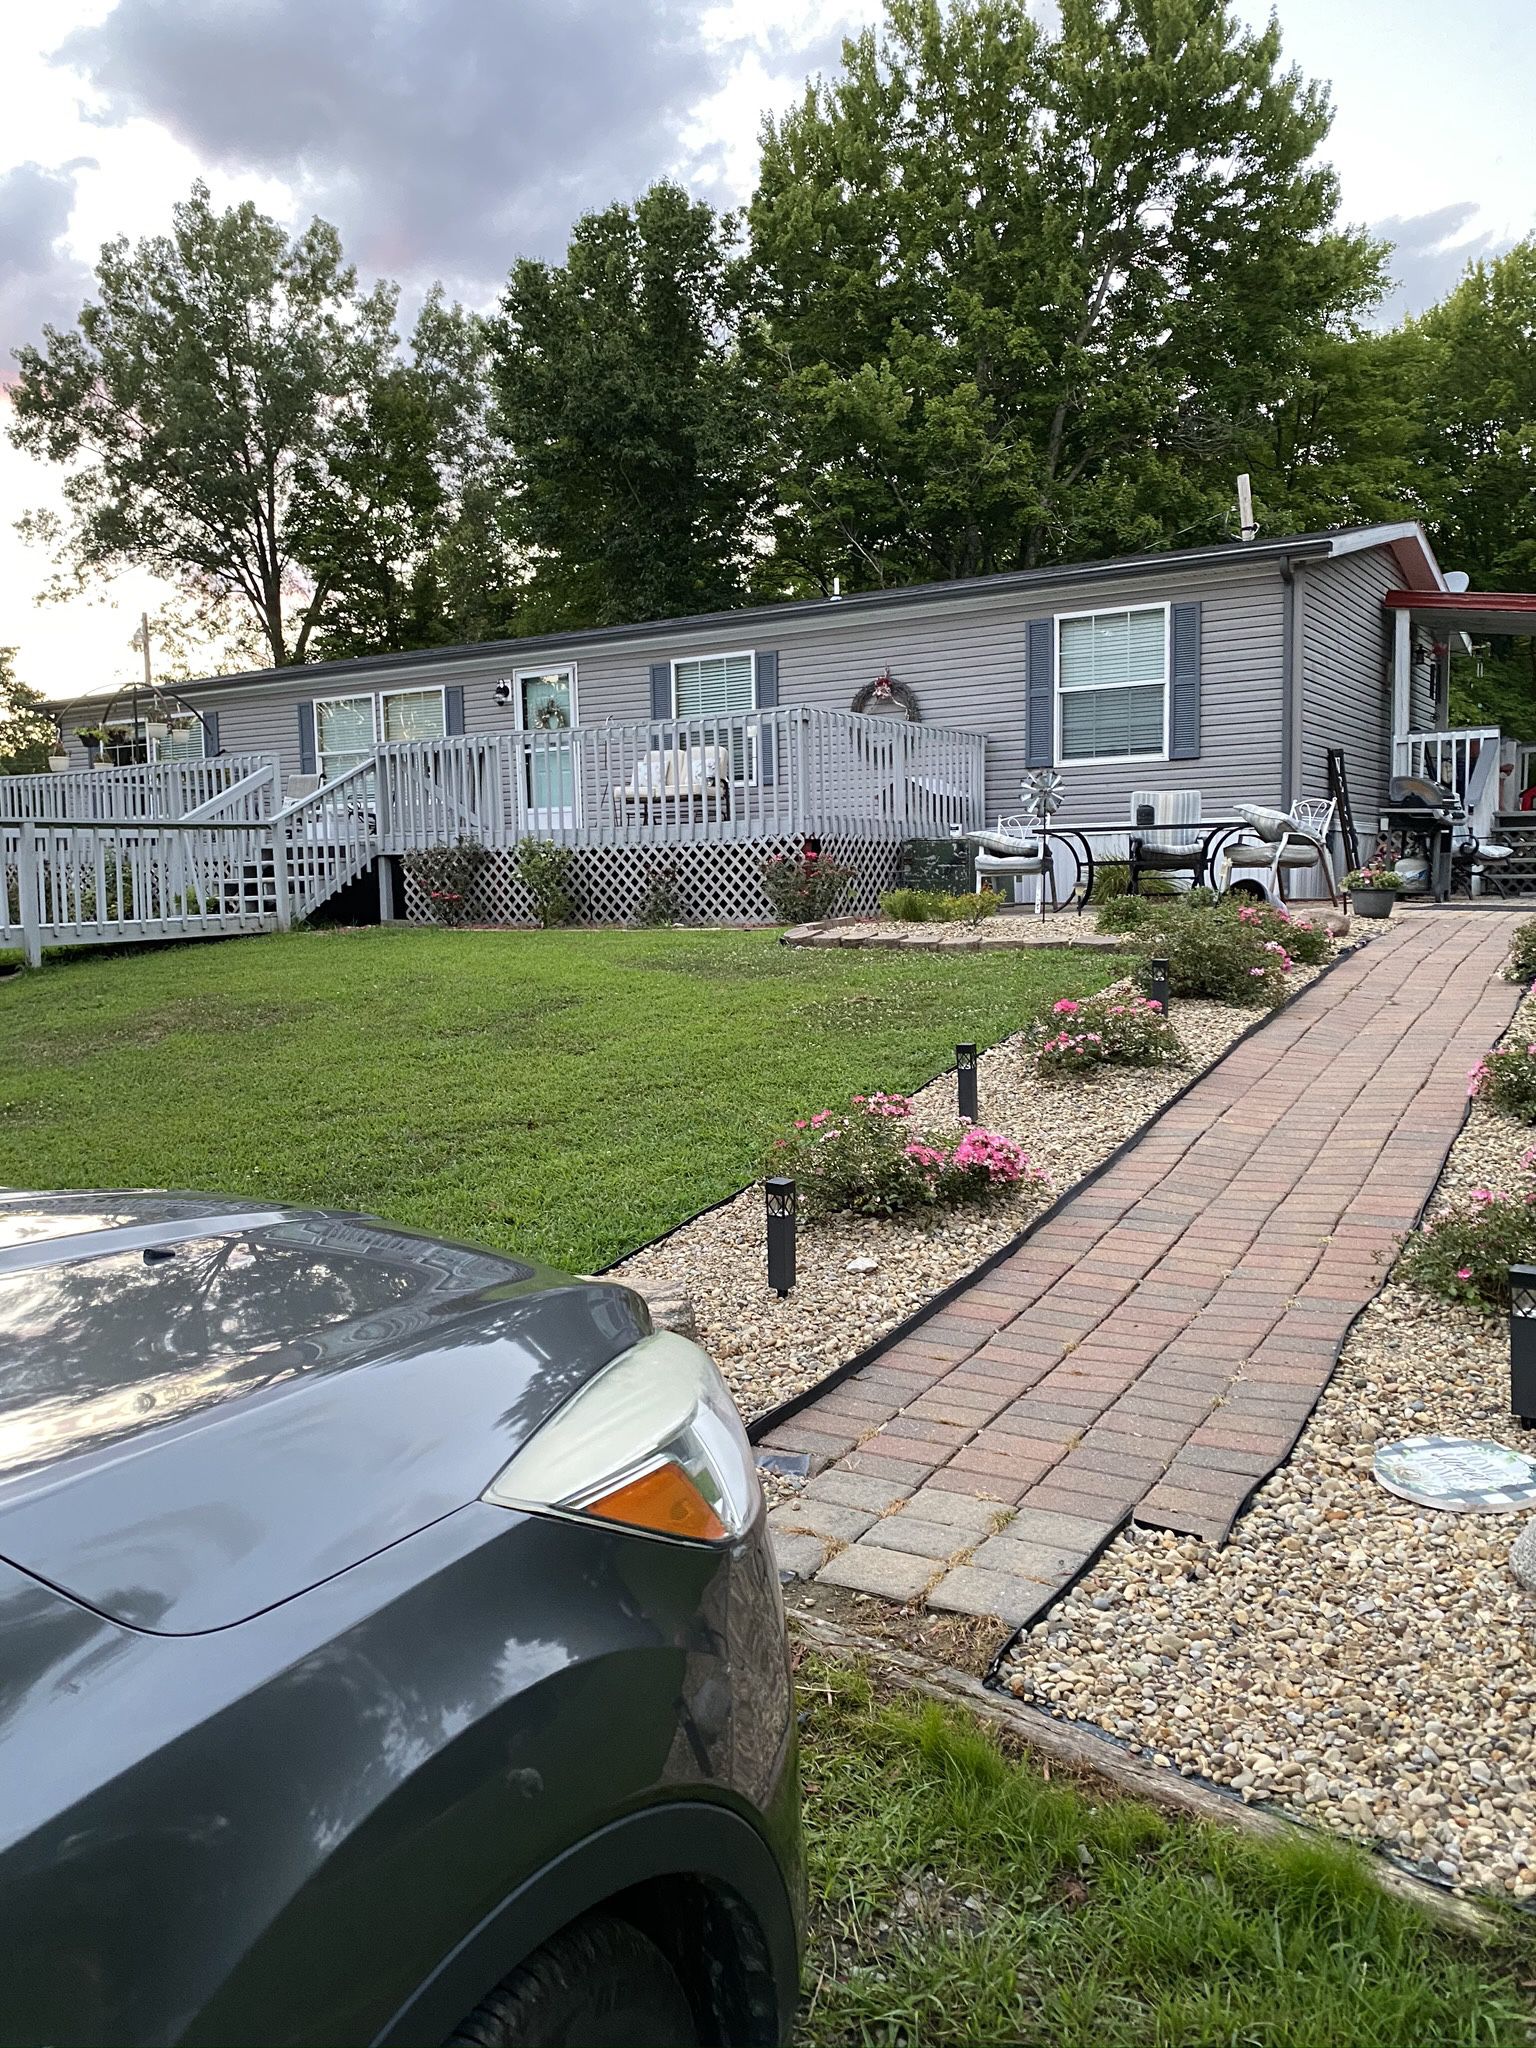 2008 Mobile Home For Sale ; Length 68; Width 28 